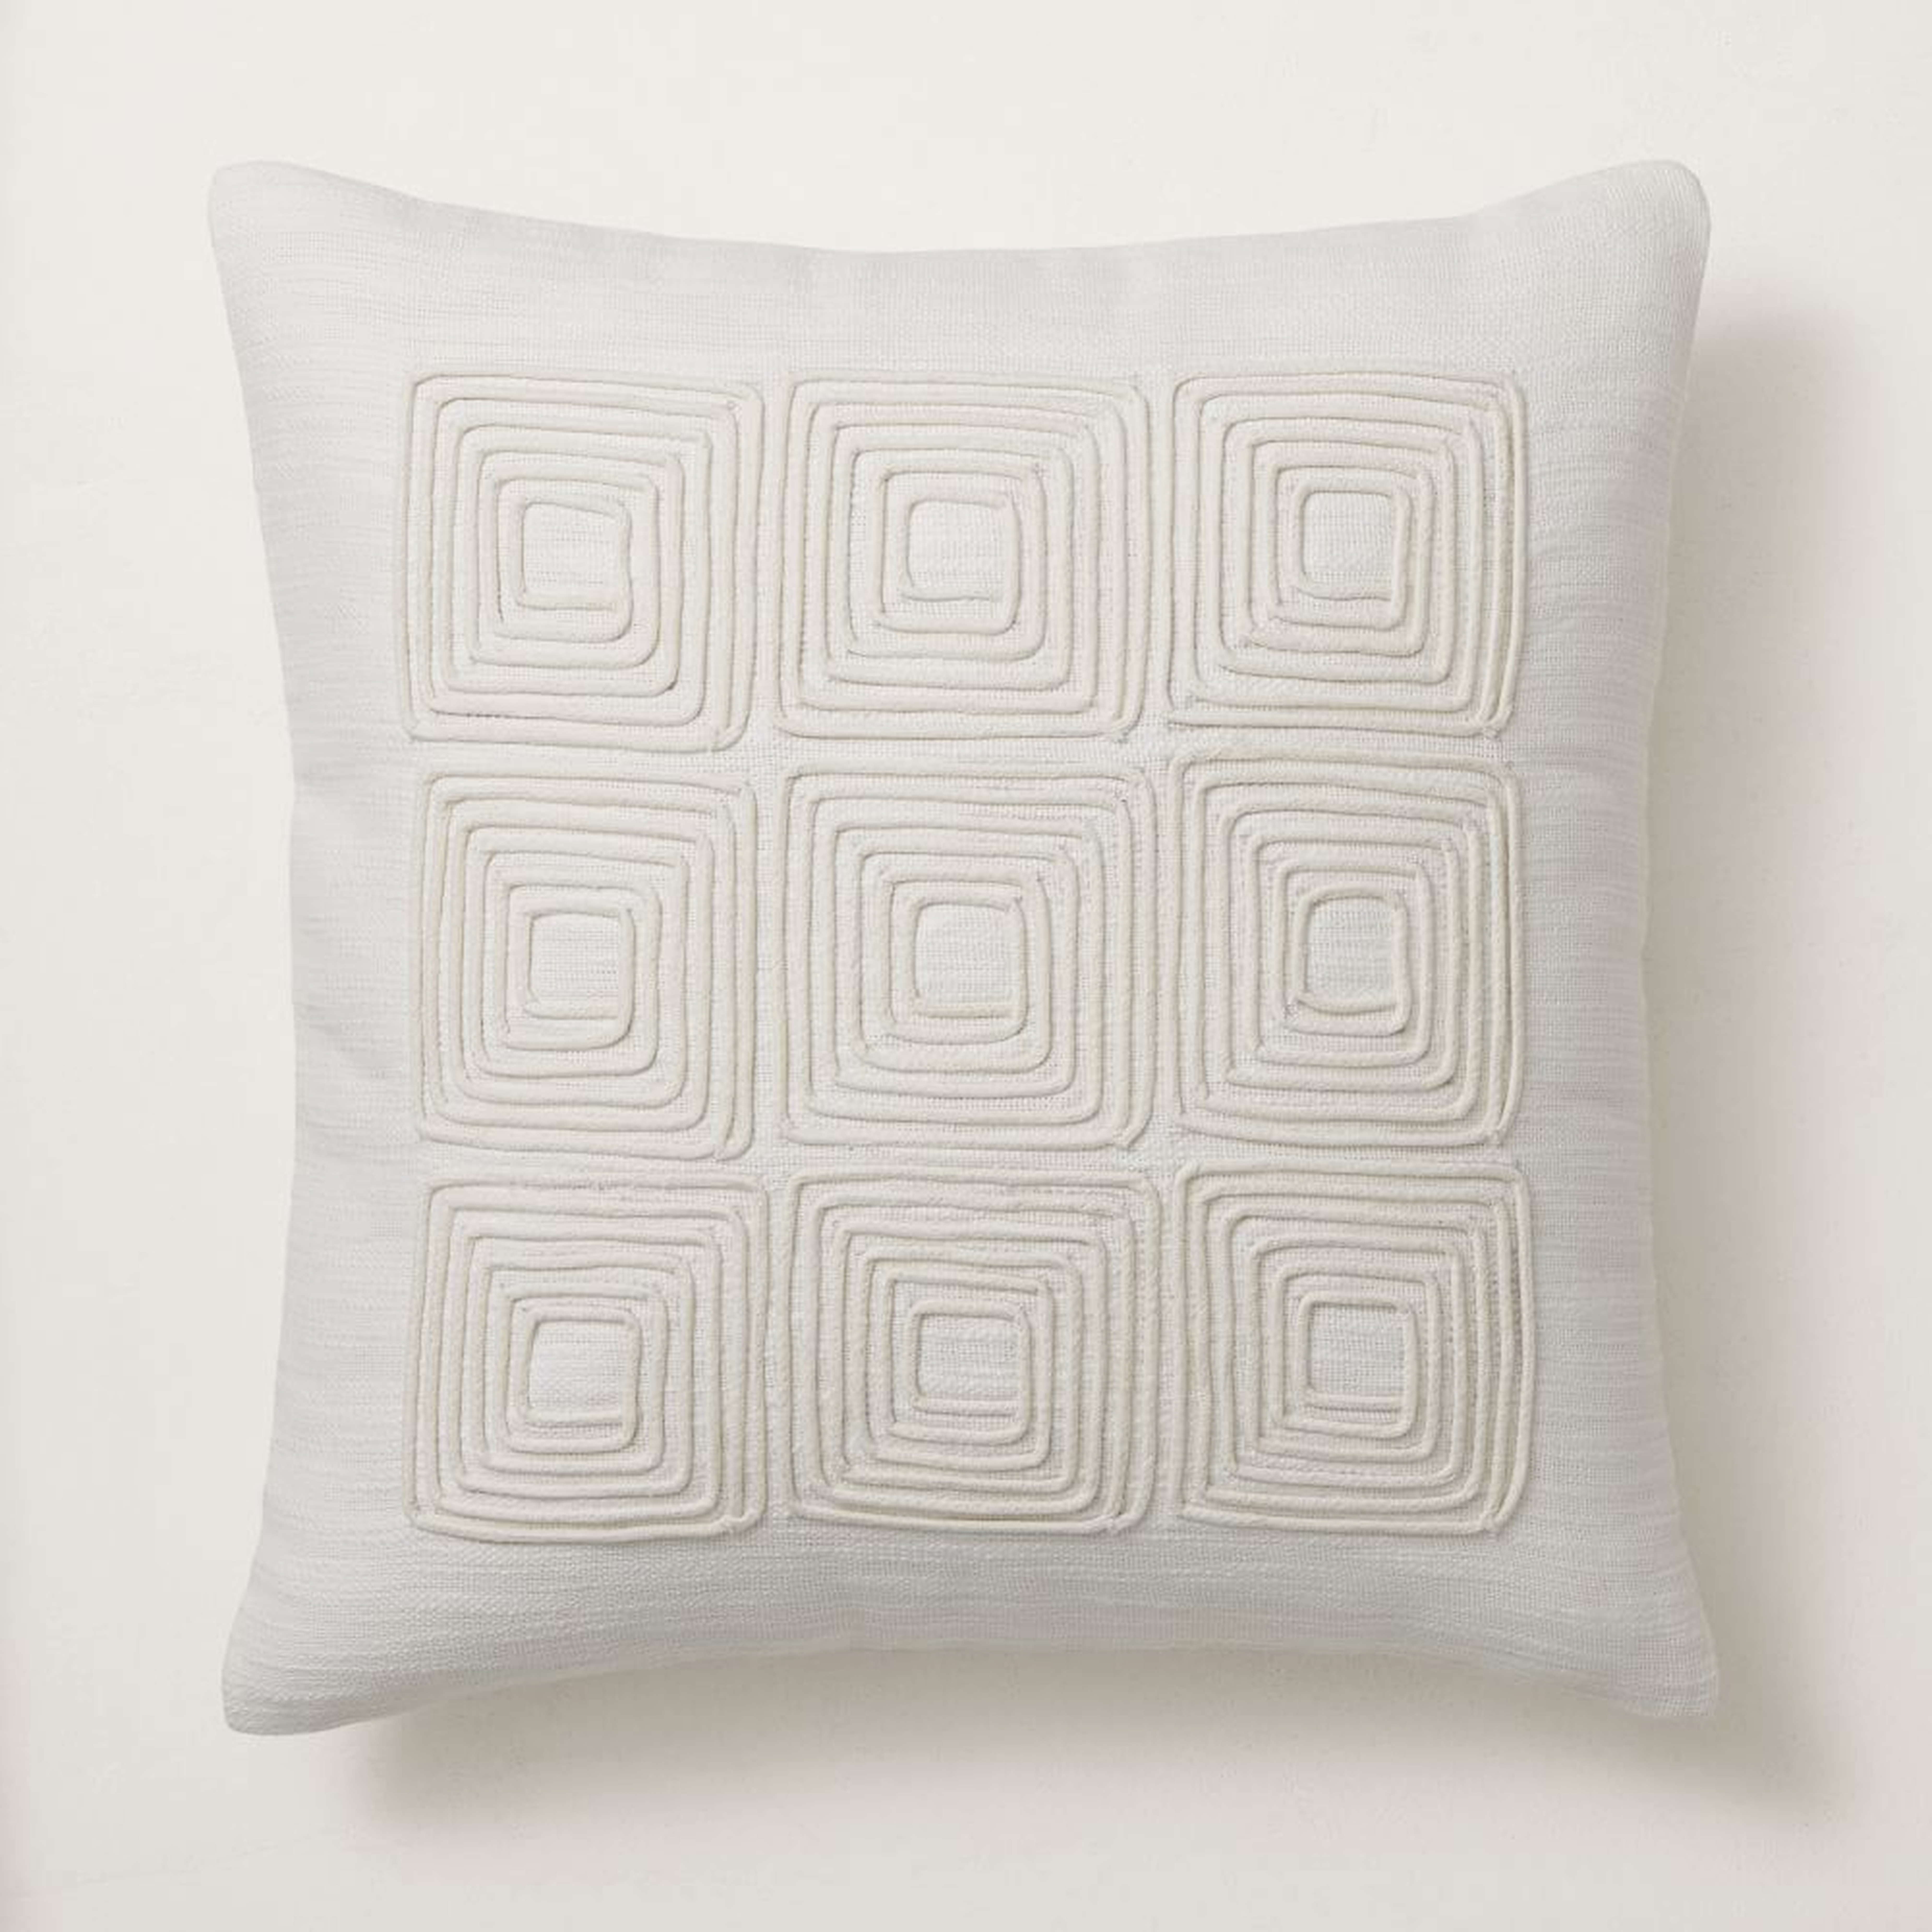 Corded Grid Pillow Cover, 20"x20", Alabaster - West Elm